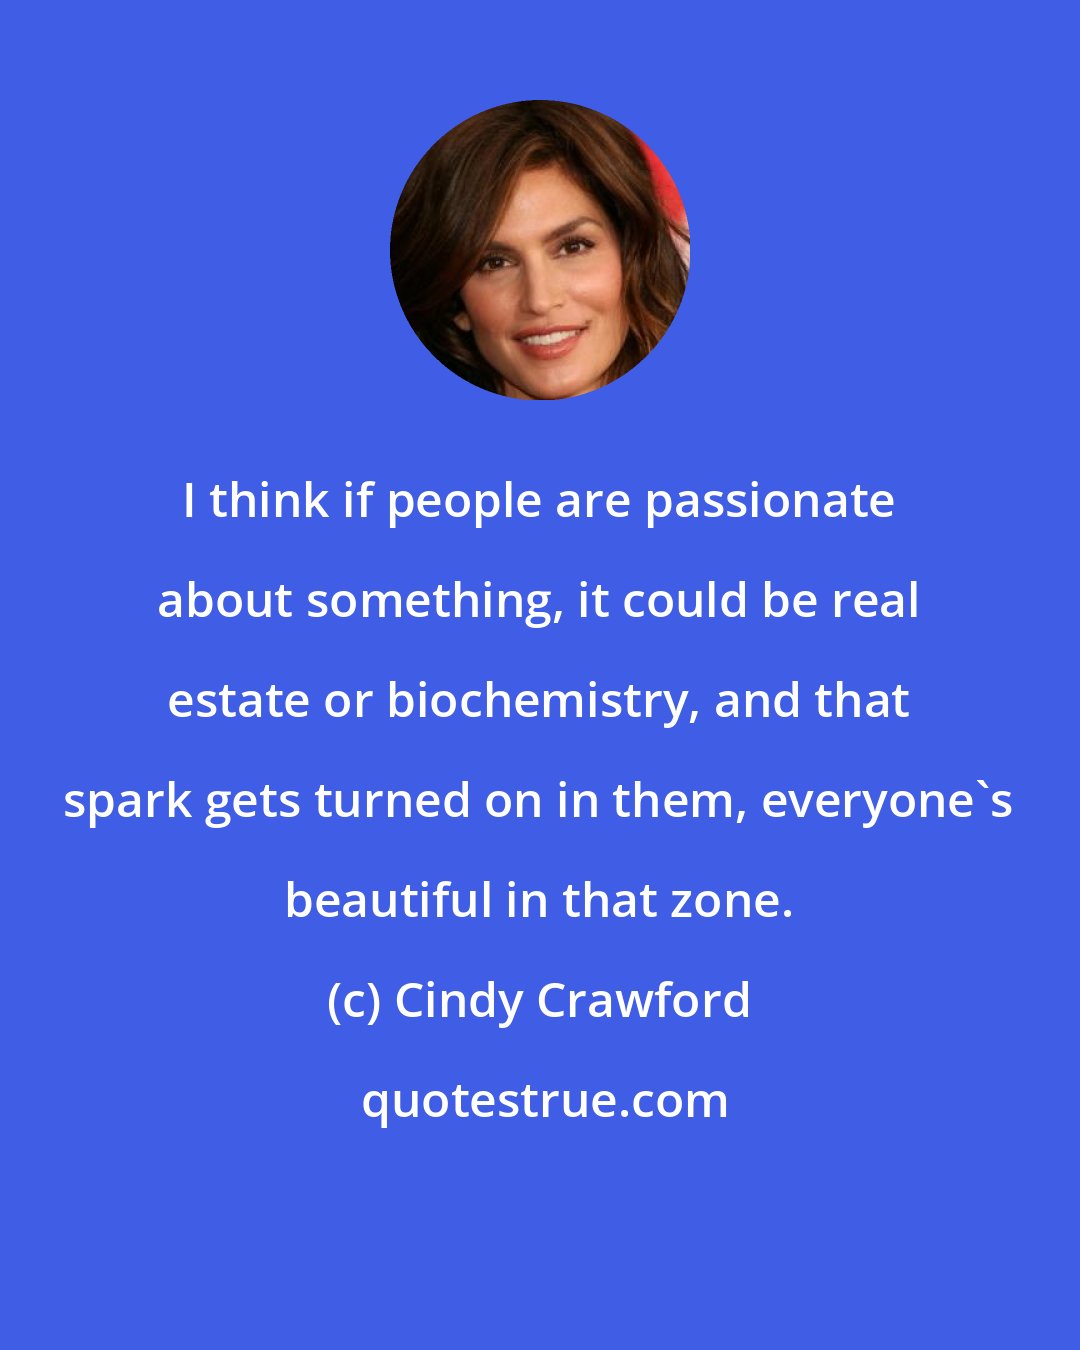 Cindy Crawford: I think if people are passionate about something, it could be real estate or biochemistry, and that spark gets turned on in them, everyone's beautiful in that zone.